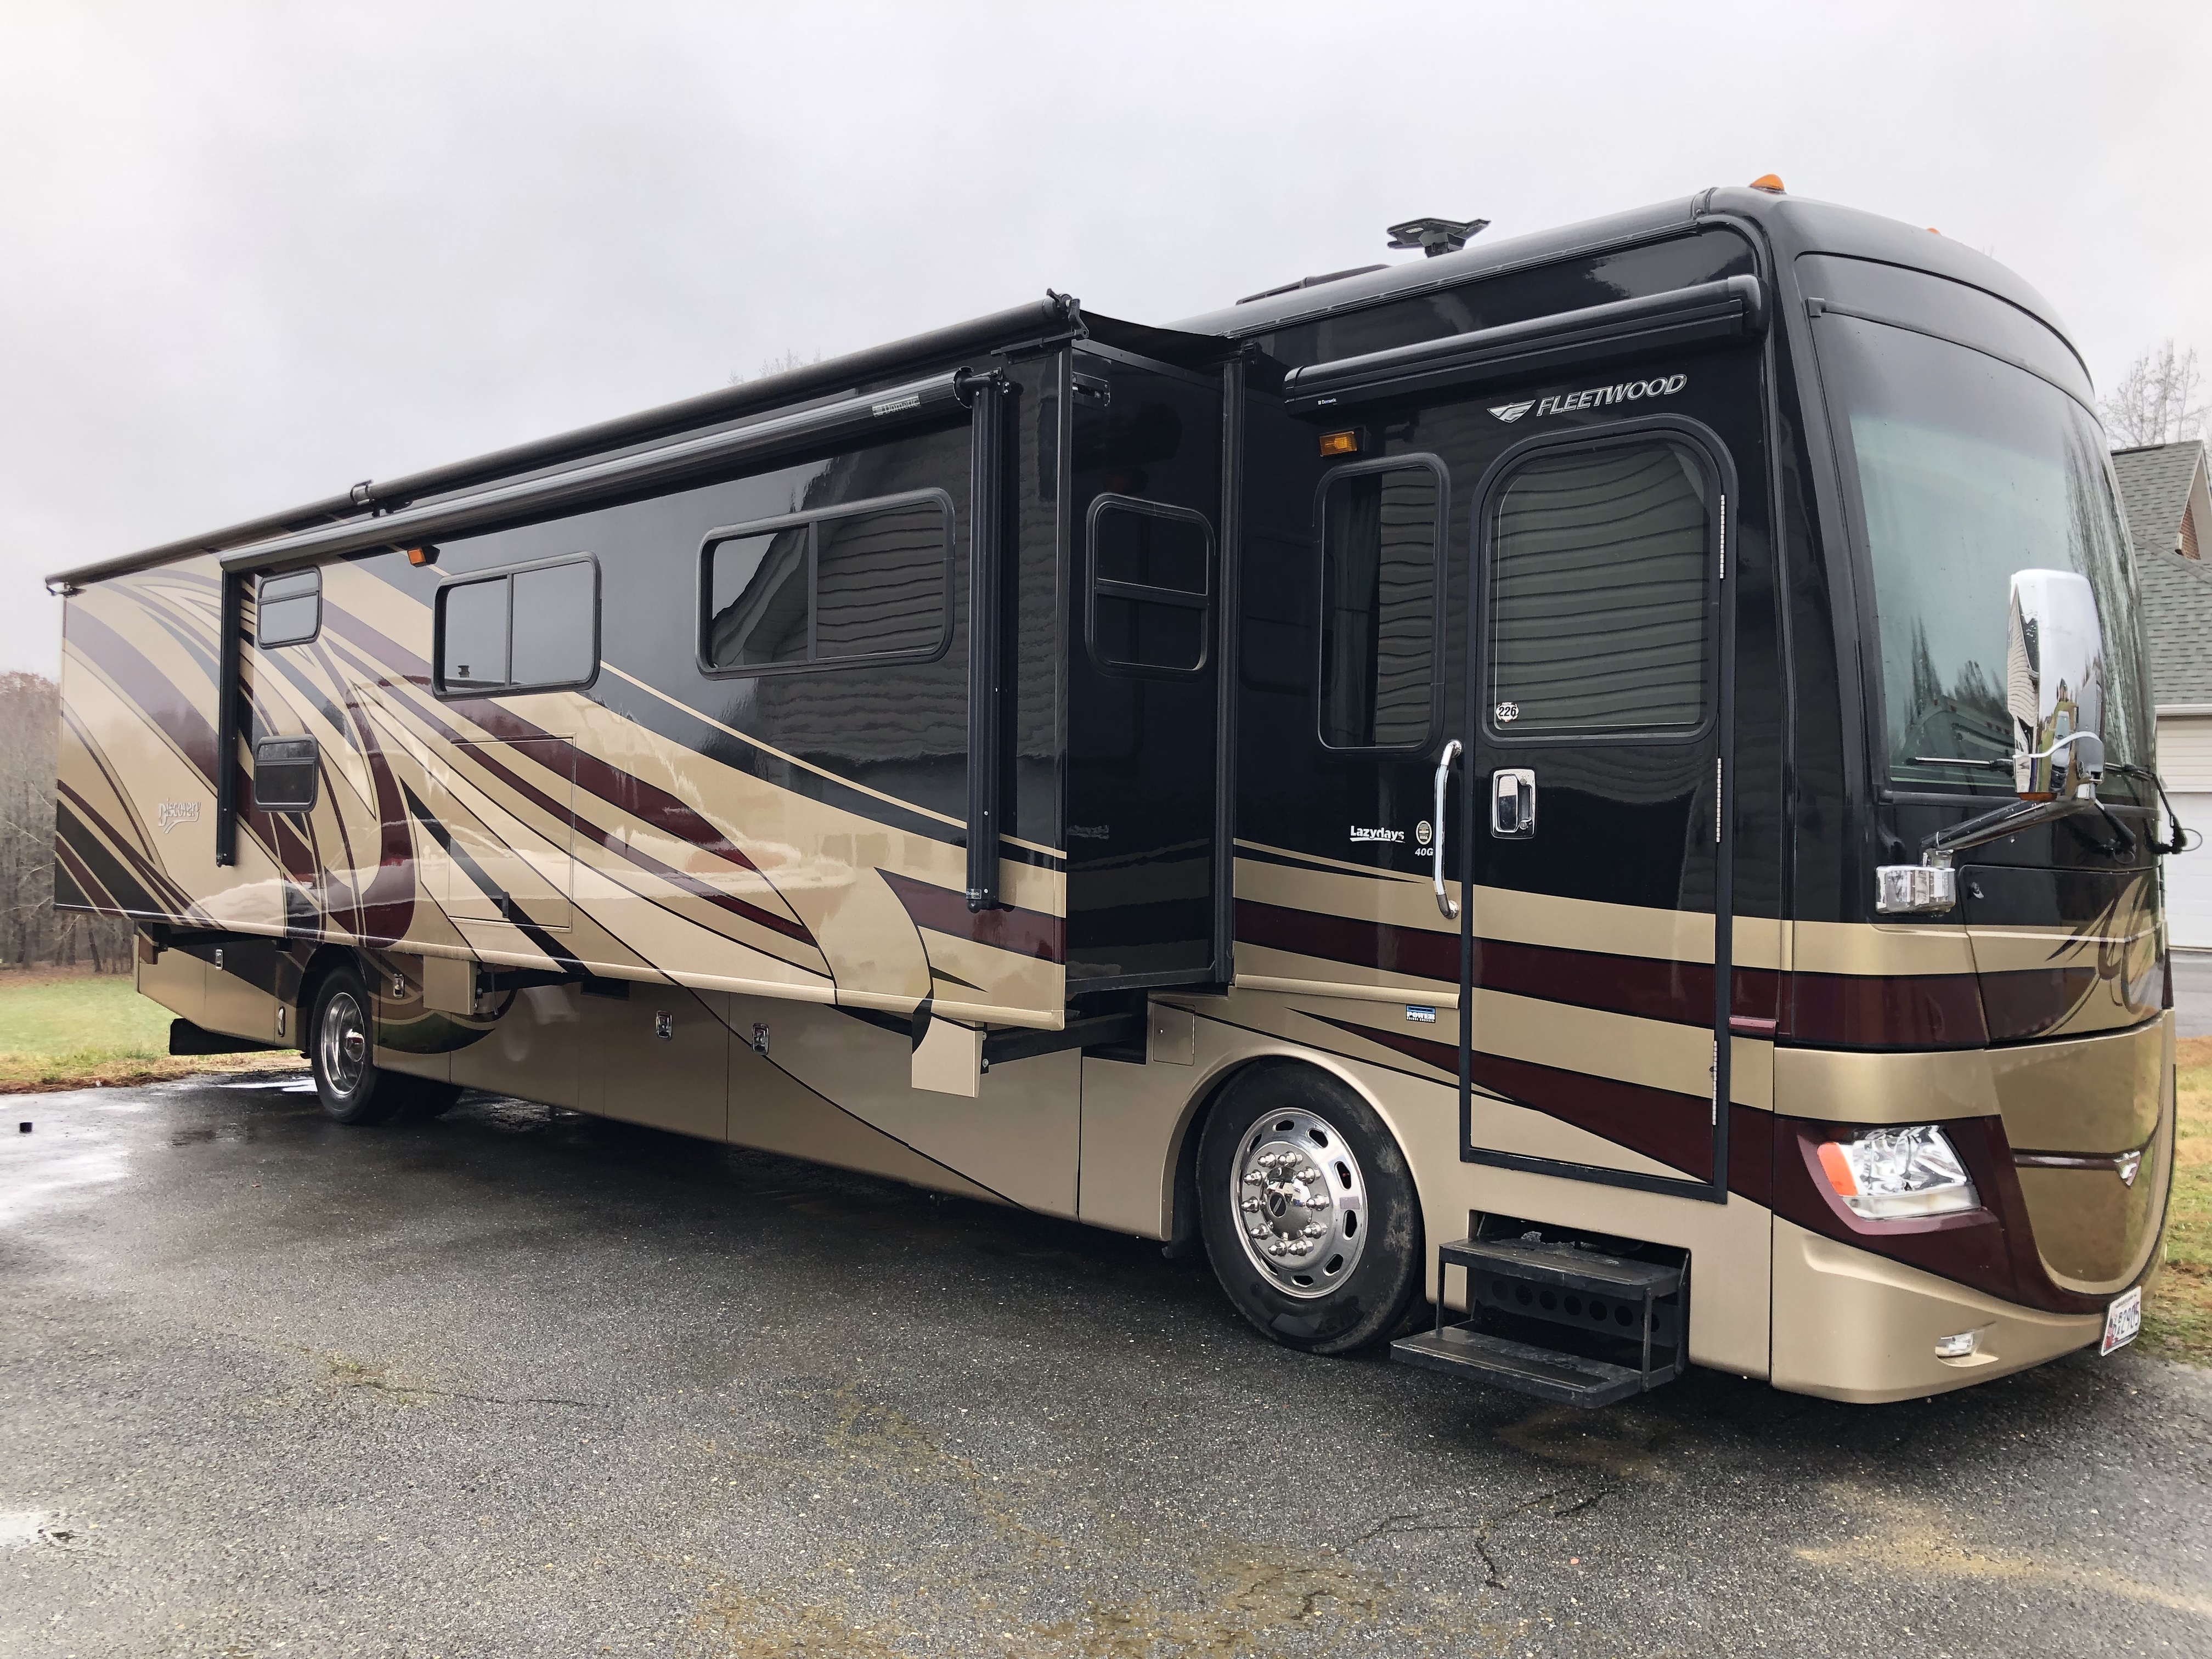 Luxury RV at a great price | RVPlusYou